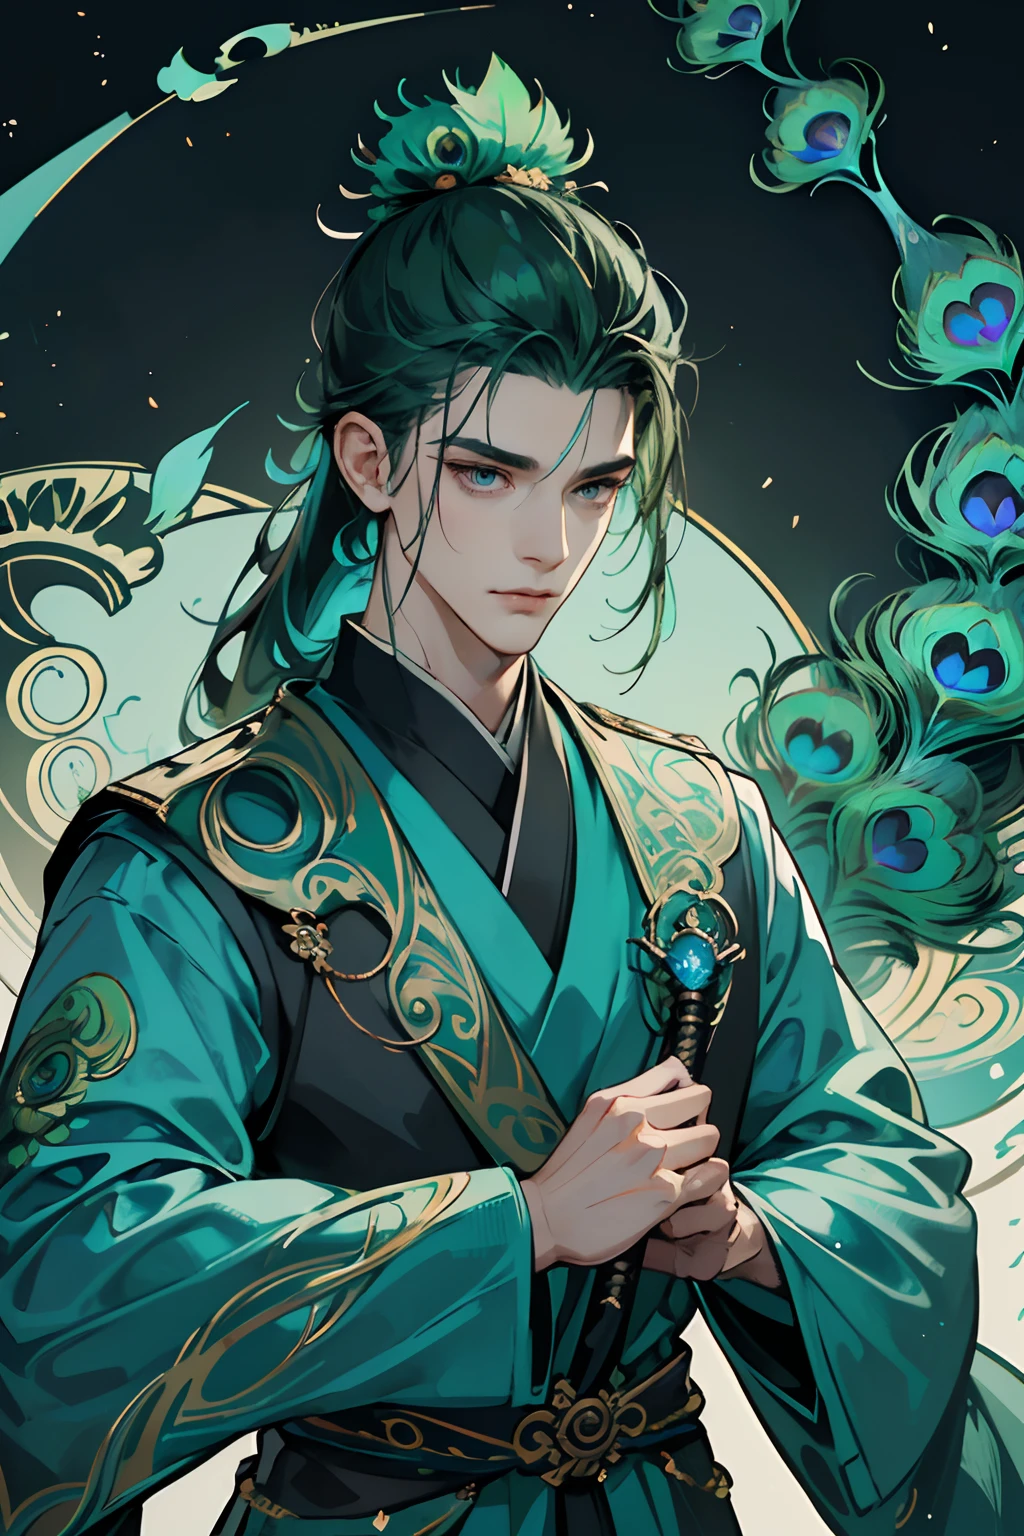 of a guy，((There are peacock feathers on the head))，Green hair，（Draped with hair），Green-blue clothes，forest backgrou，（Very delicate face），1人, mtu, Peacock style, Ancient Chinese hairstyle, Black eyes, Handsome, Handsome, Masculine, Tall,Silver armor，((Peacock feather pattern))，Court，，The proportions are correct，（Very detailed faces），swordsmen，（With a weapon in his hand），ancient Chinese style mythology，High ponytail hairstyle，Neck details，（Flying peacock feathers），clothes details，high-necked，（Game quality），Light and shadow tracking，Ray traching，detailed glow，cg render，hair detail，Blue long hair，blue colored eyes，（Handsome），Handsome，（juvenile sense），Intricate clothing patterns，Perfectcomposition，Refinement，（high qulity），higher details，Lots of details，The background is complex，Tiangong atmosphere